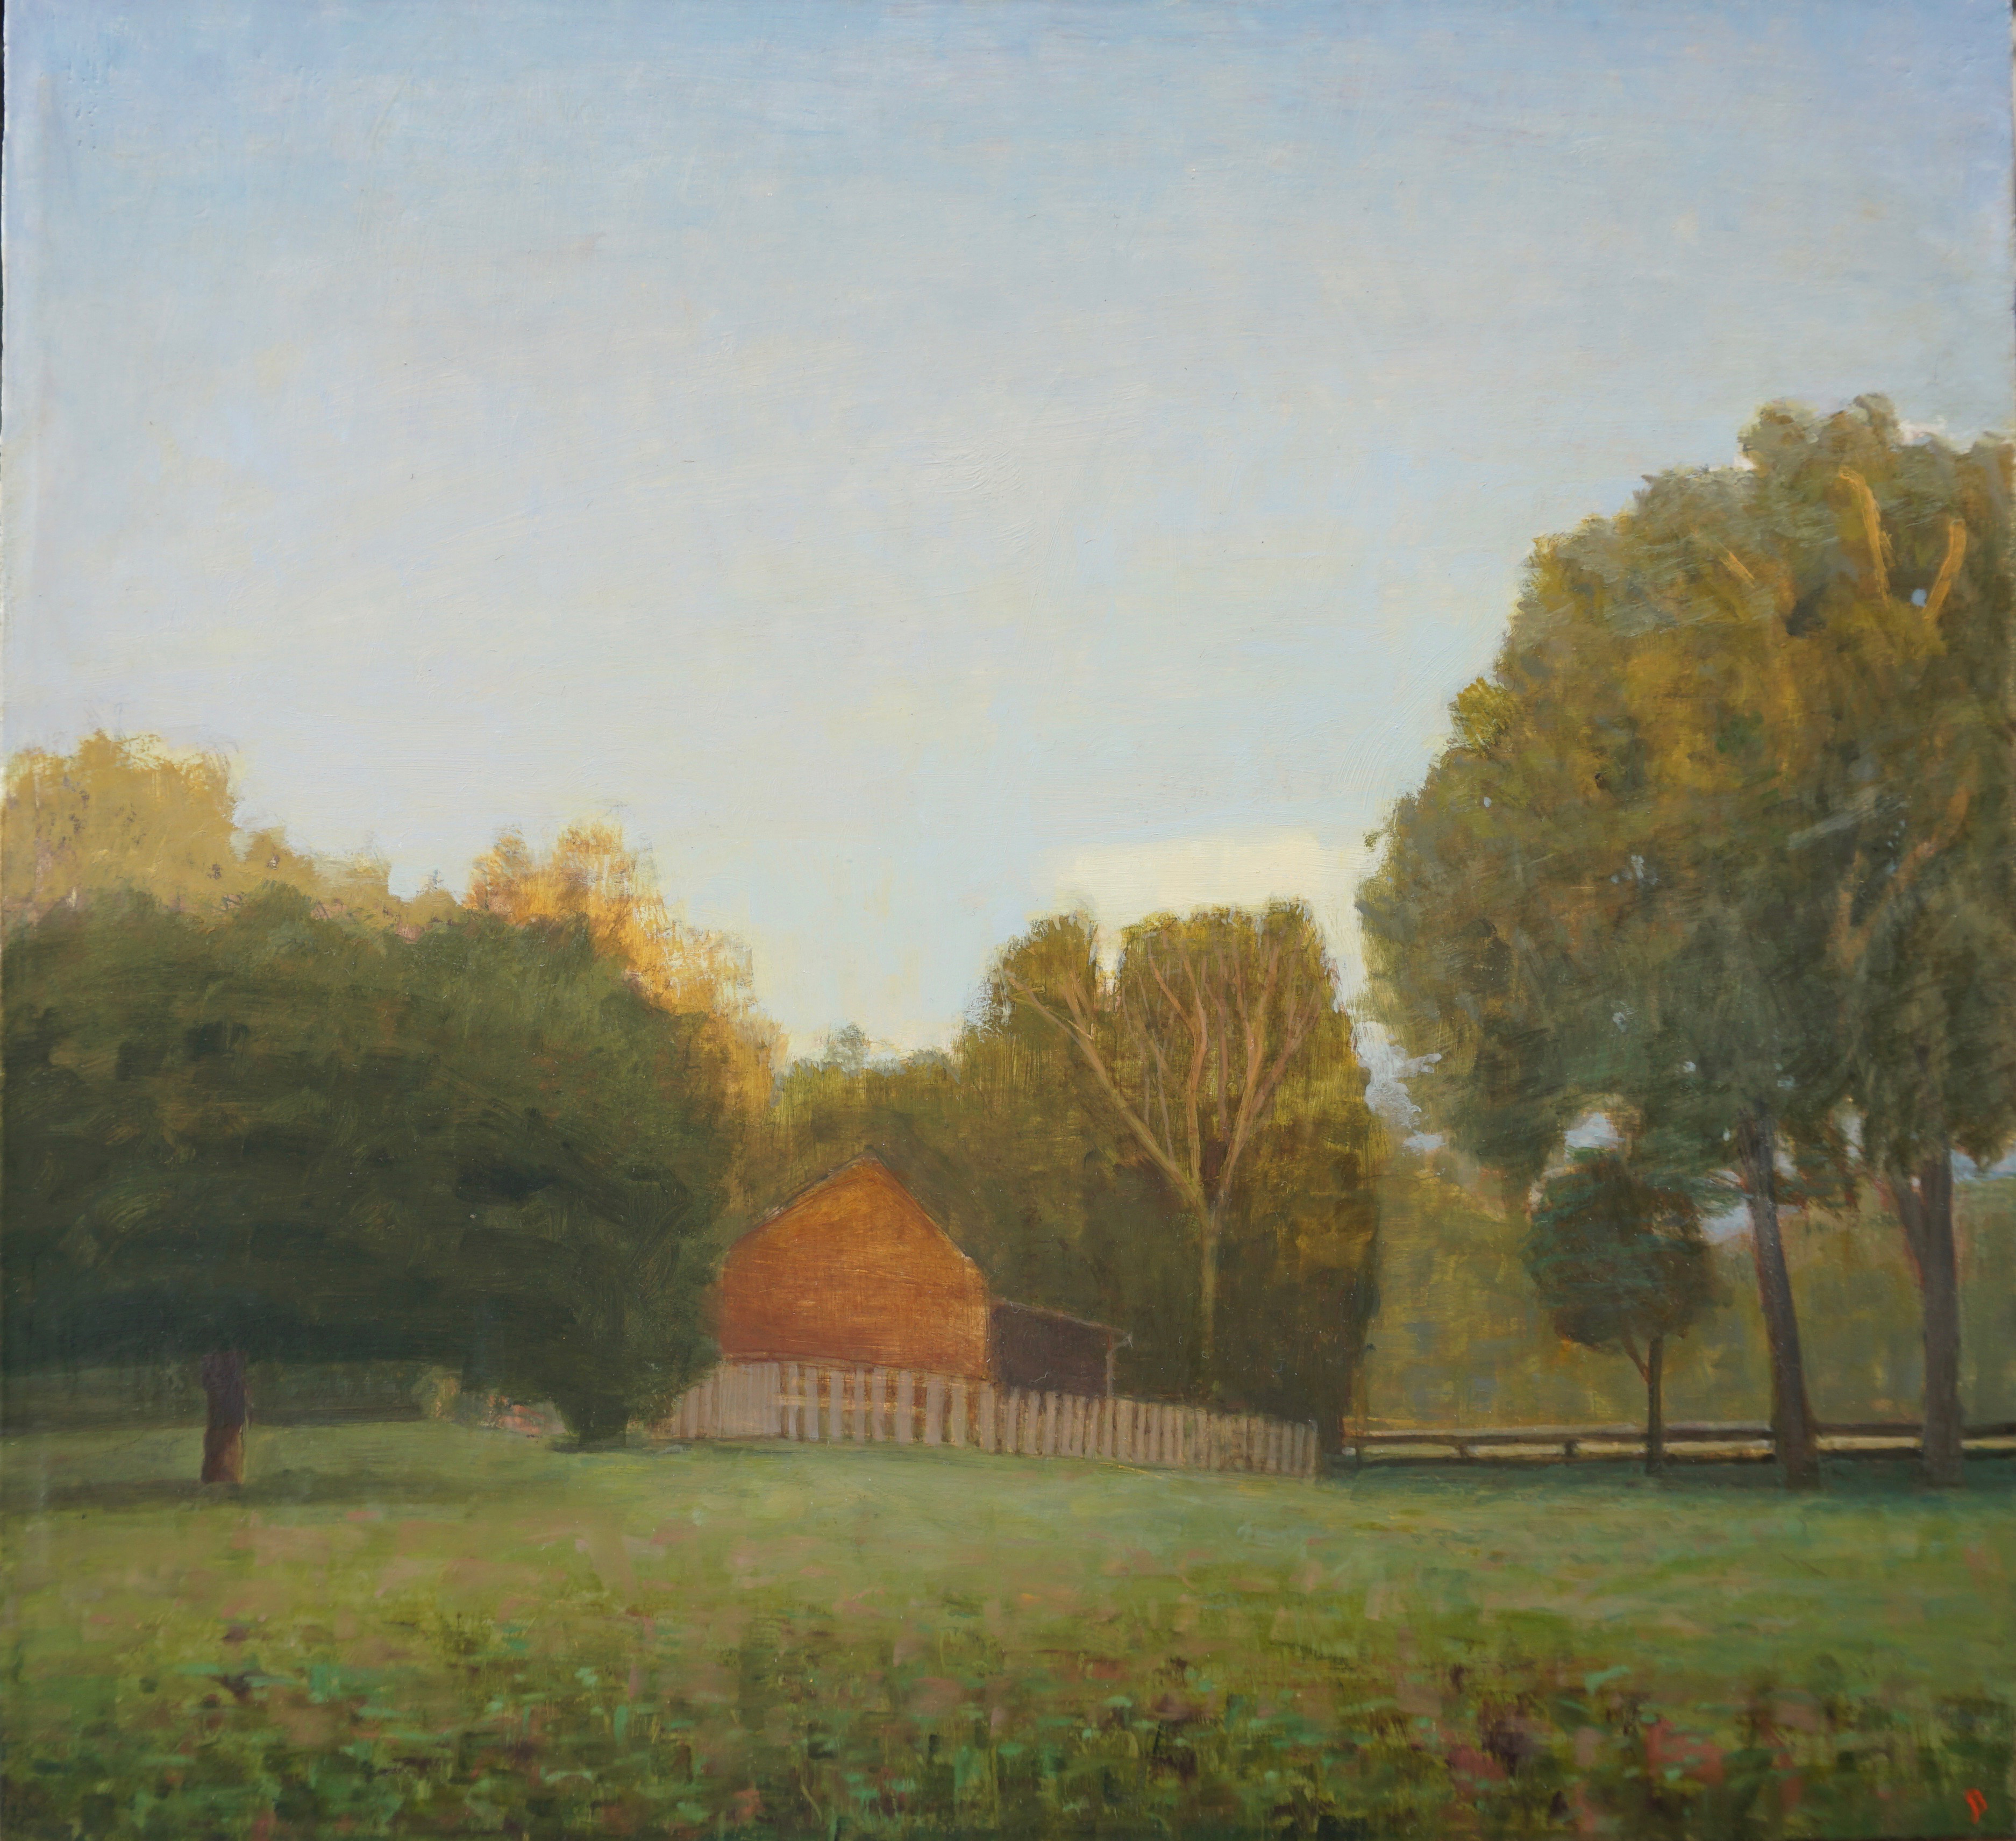 October Dusk, Barn and Field, Egg Tempera and oil on linen, 13 x 14 by John Beerman at Craven Allen Gallery